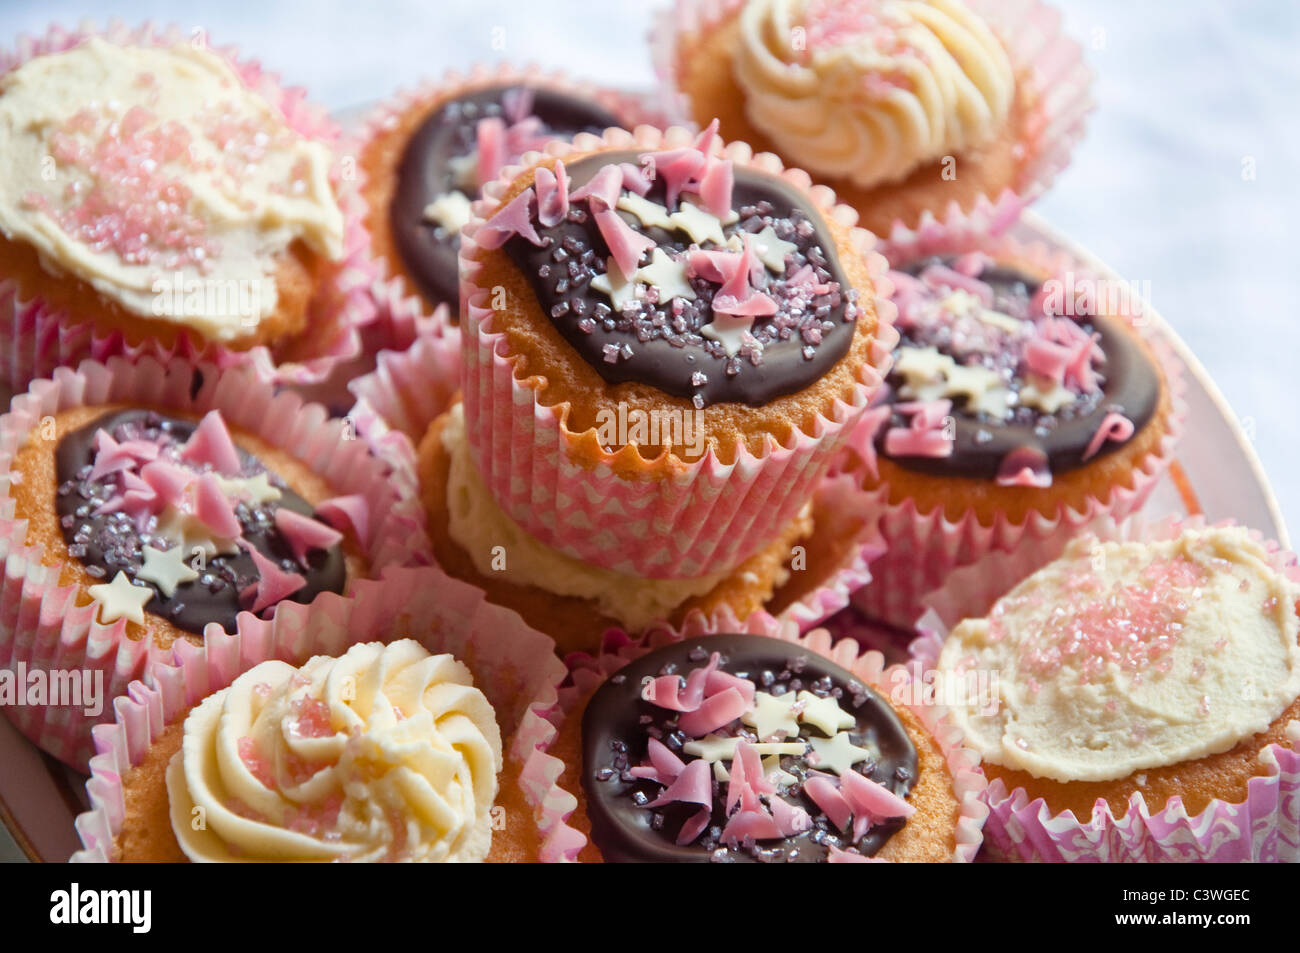 Homemade cupcakes / cup cakes. Stock Photo